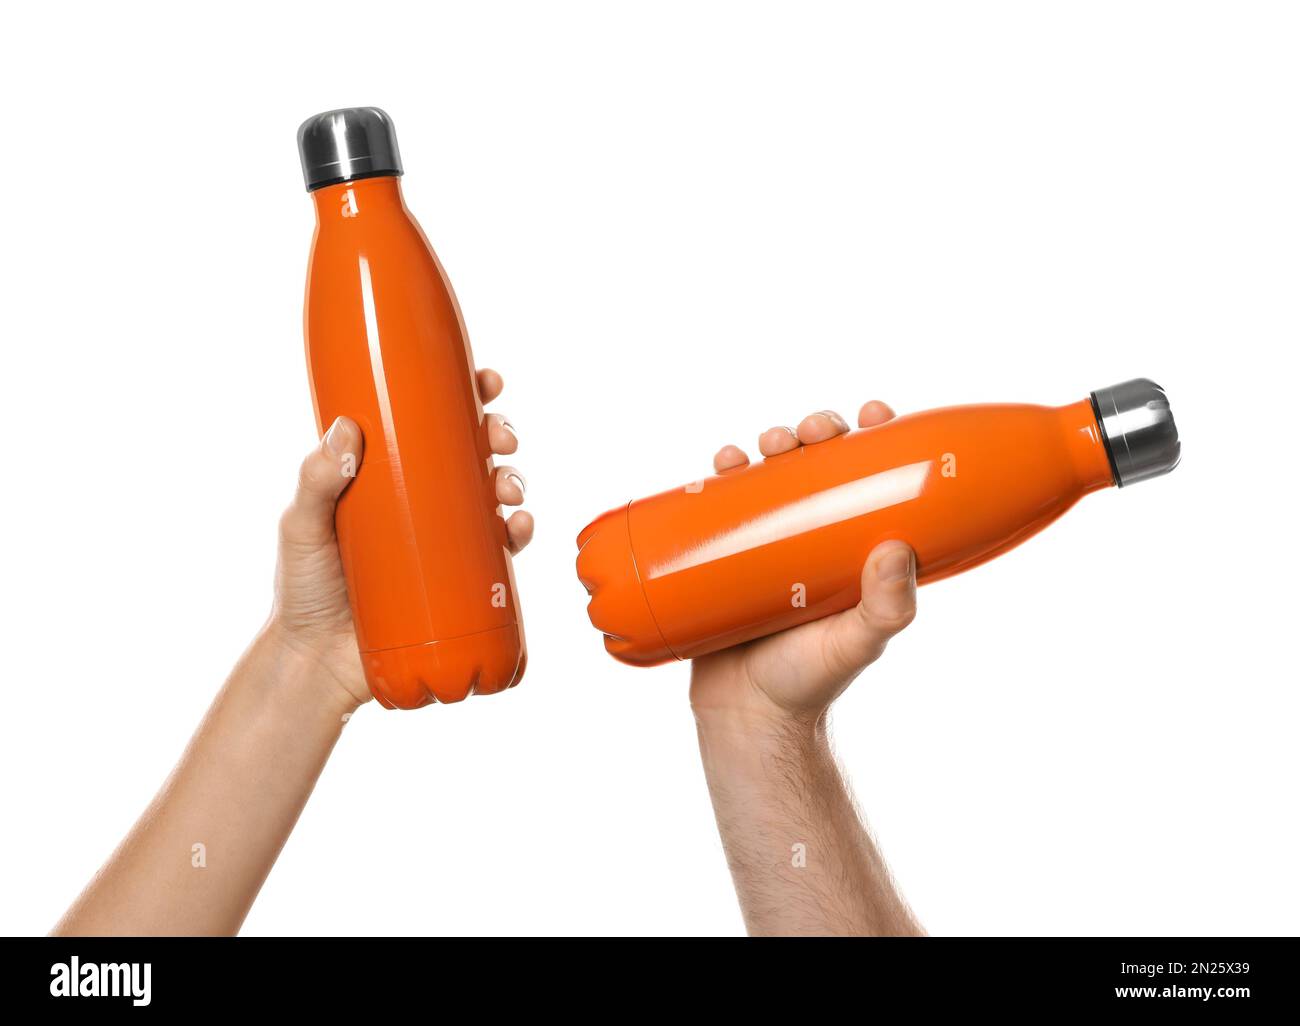 https://c8.alamy.com/comp/2N25X39/people-holding-orange-thermos-bottles-collage-of-photos-on-white-background-2N25X39.jpg